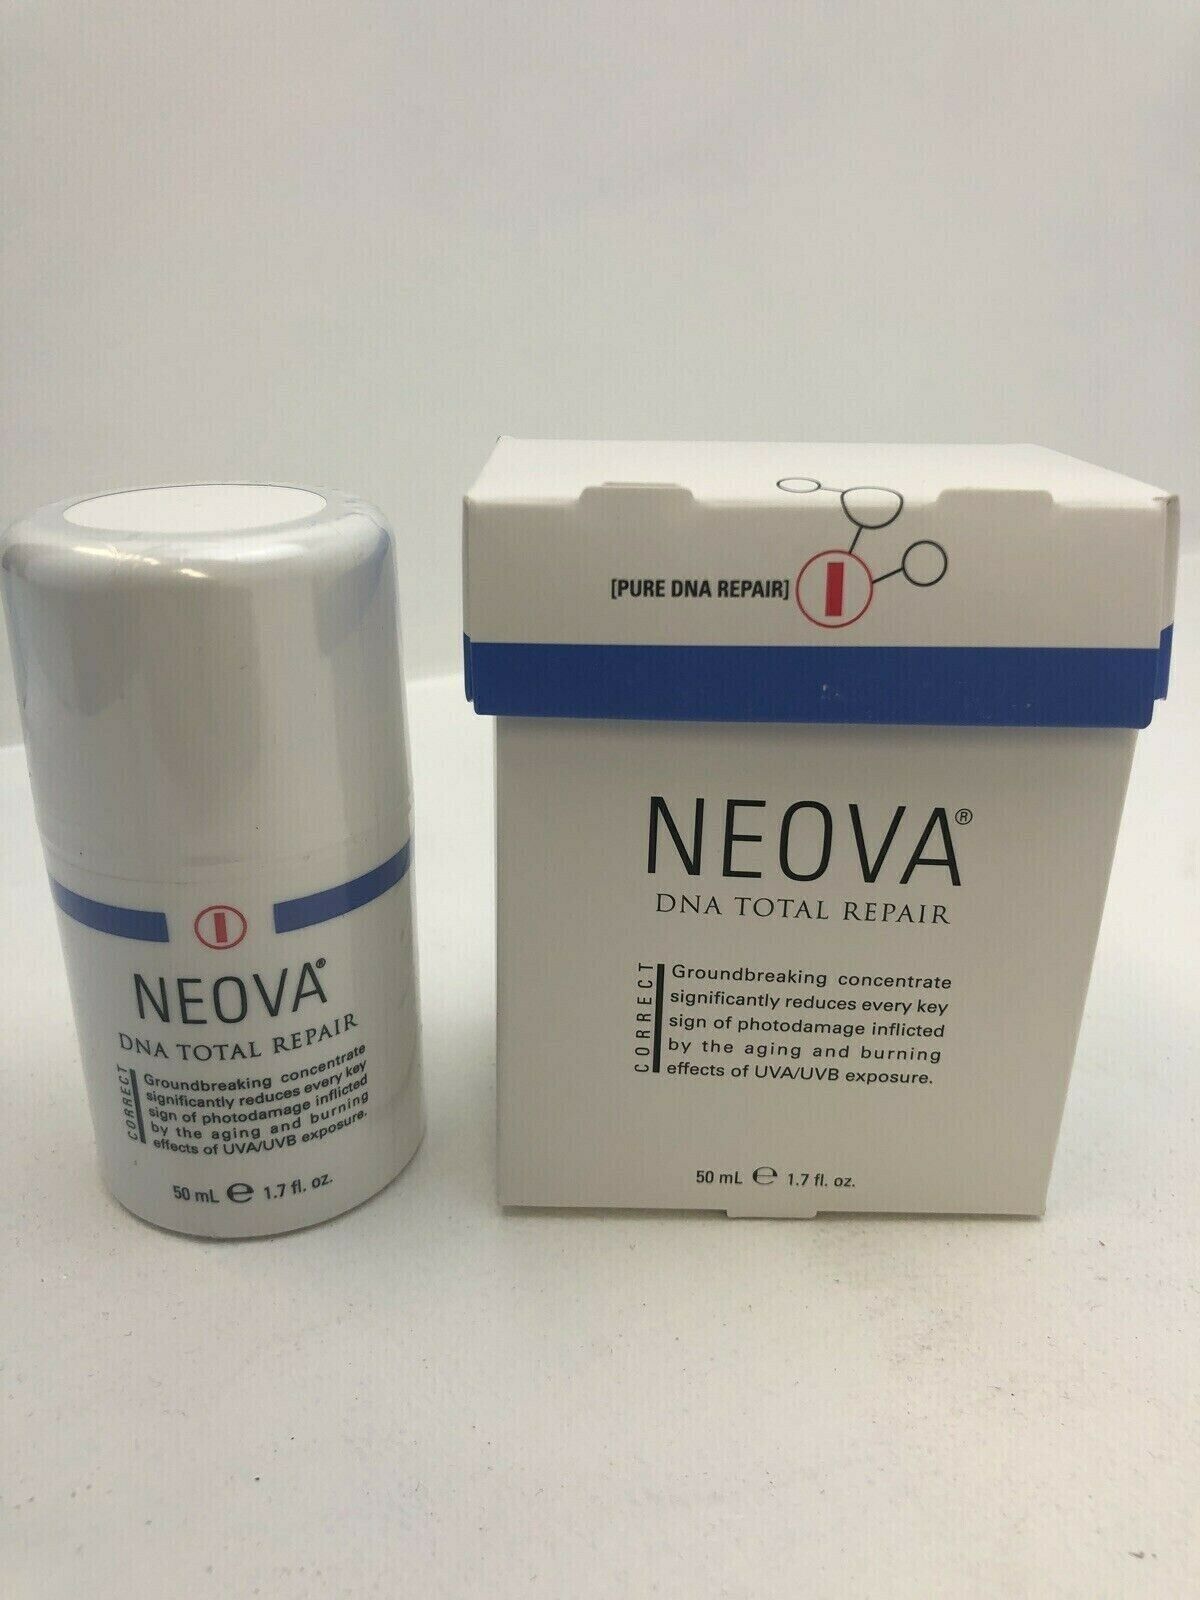 NEOVA DNA TOTAL REPAIR. 50mL 1.7fl.oz. - NEW *SOLD OUT IN EUROPE*